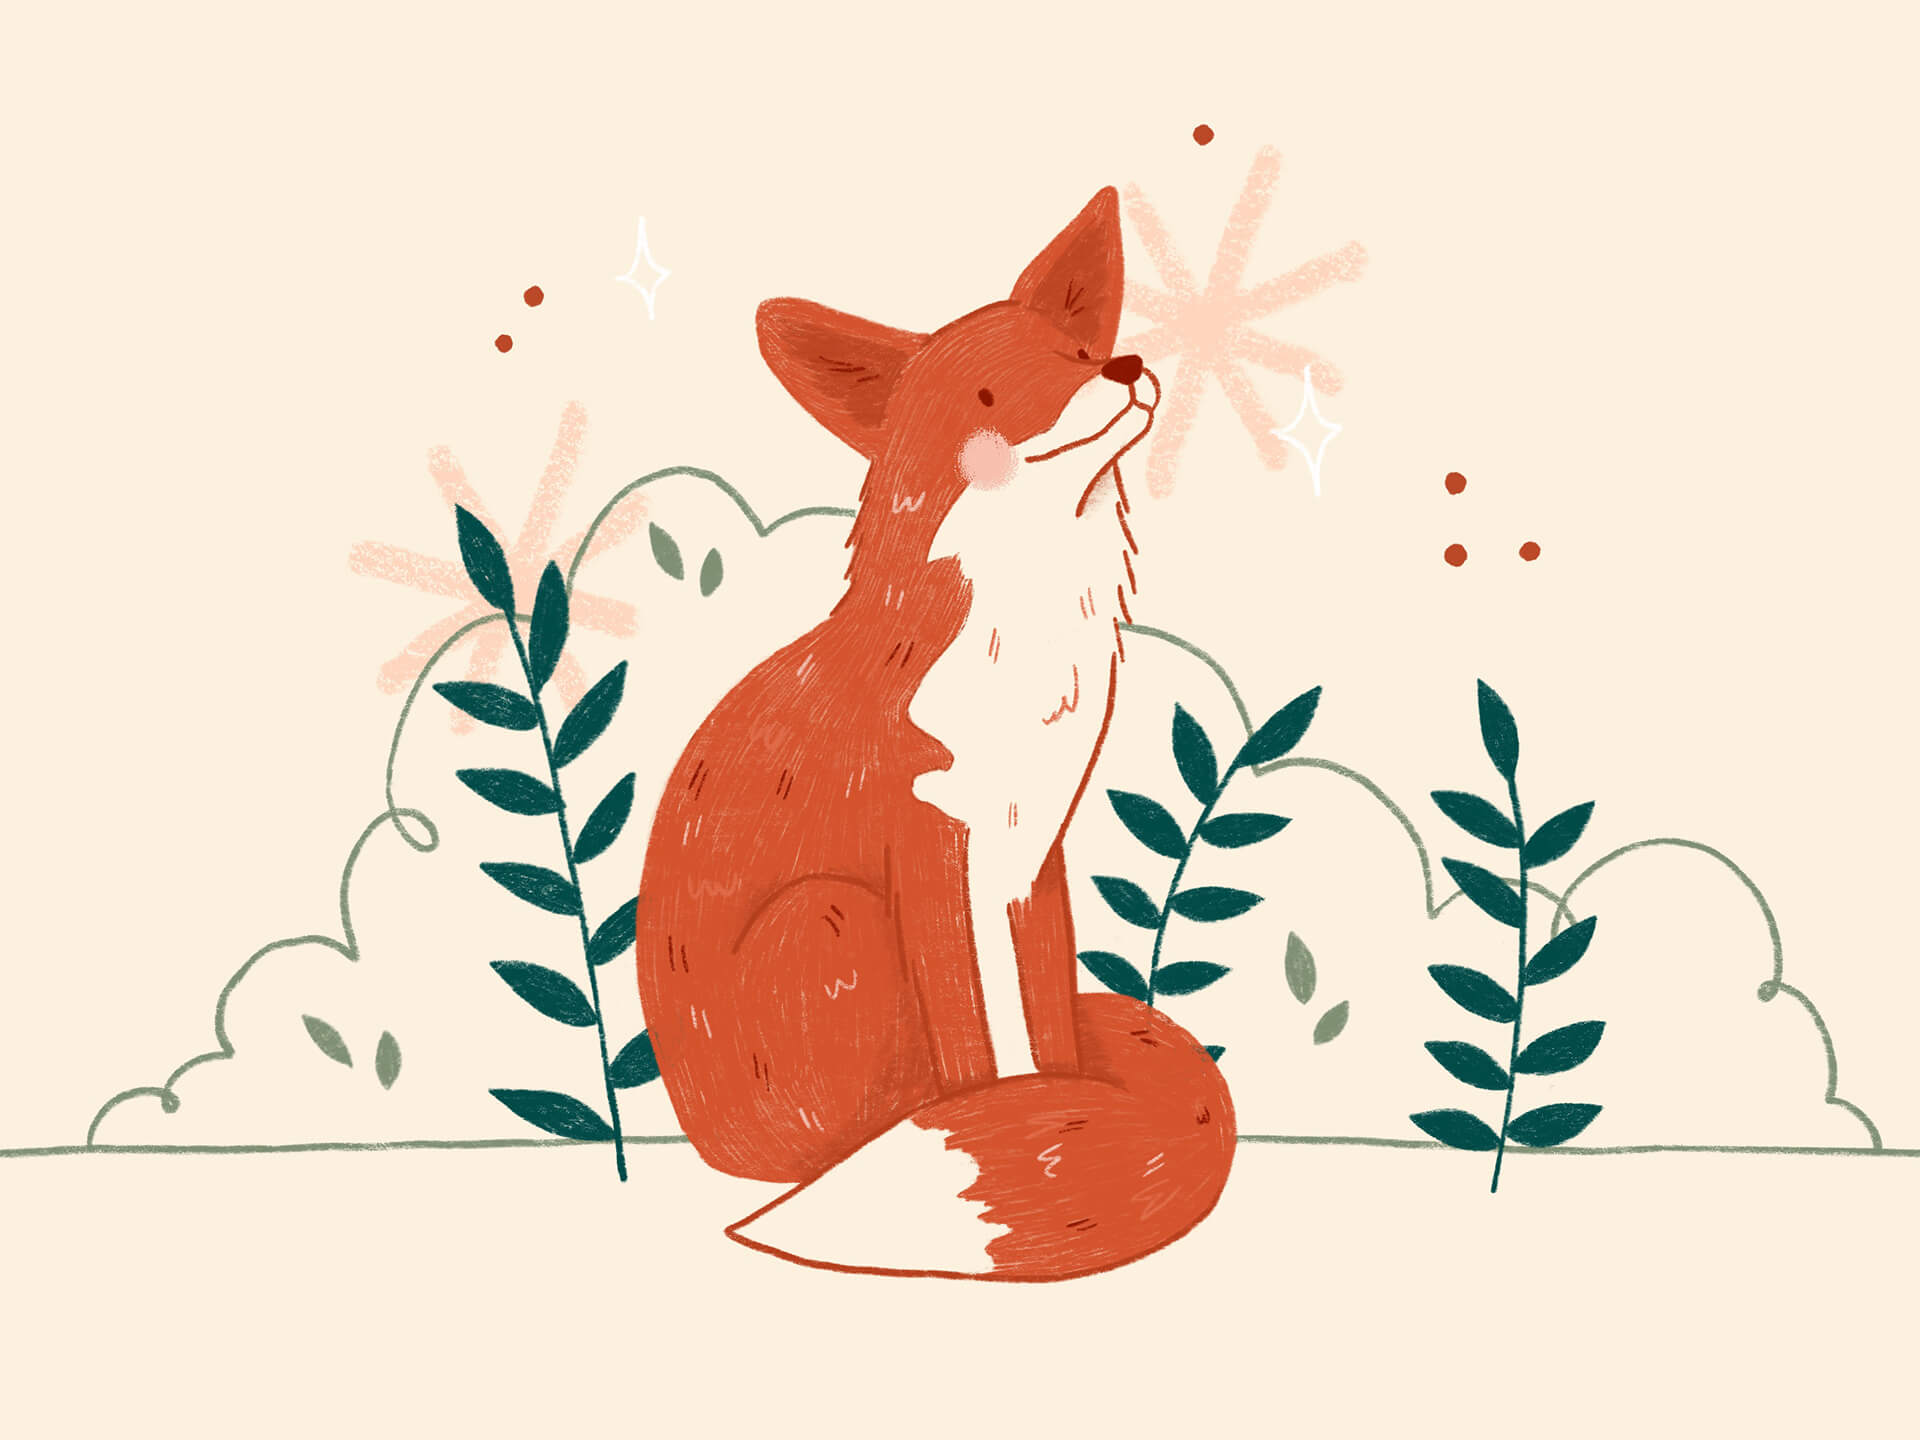 An illustration of a fox by some bushes and plants